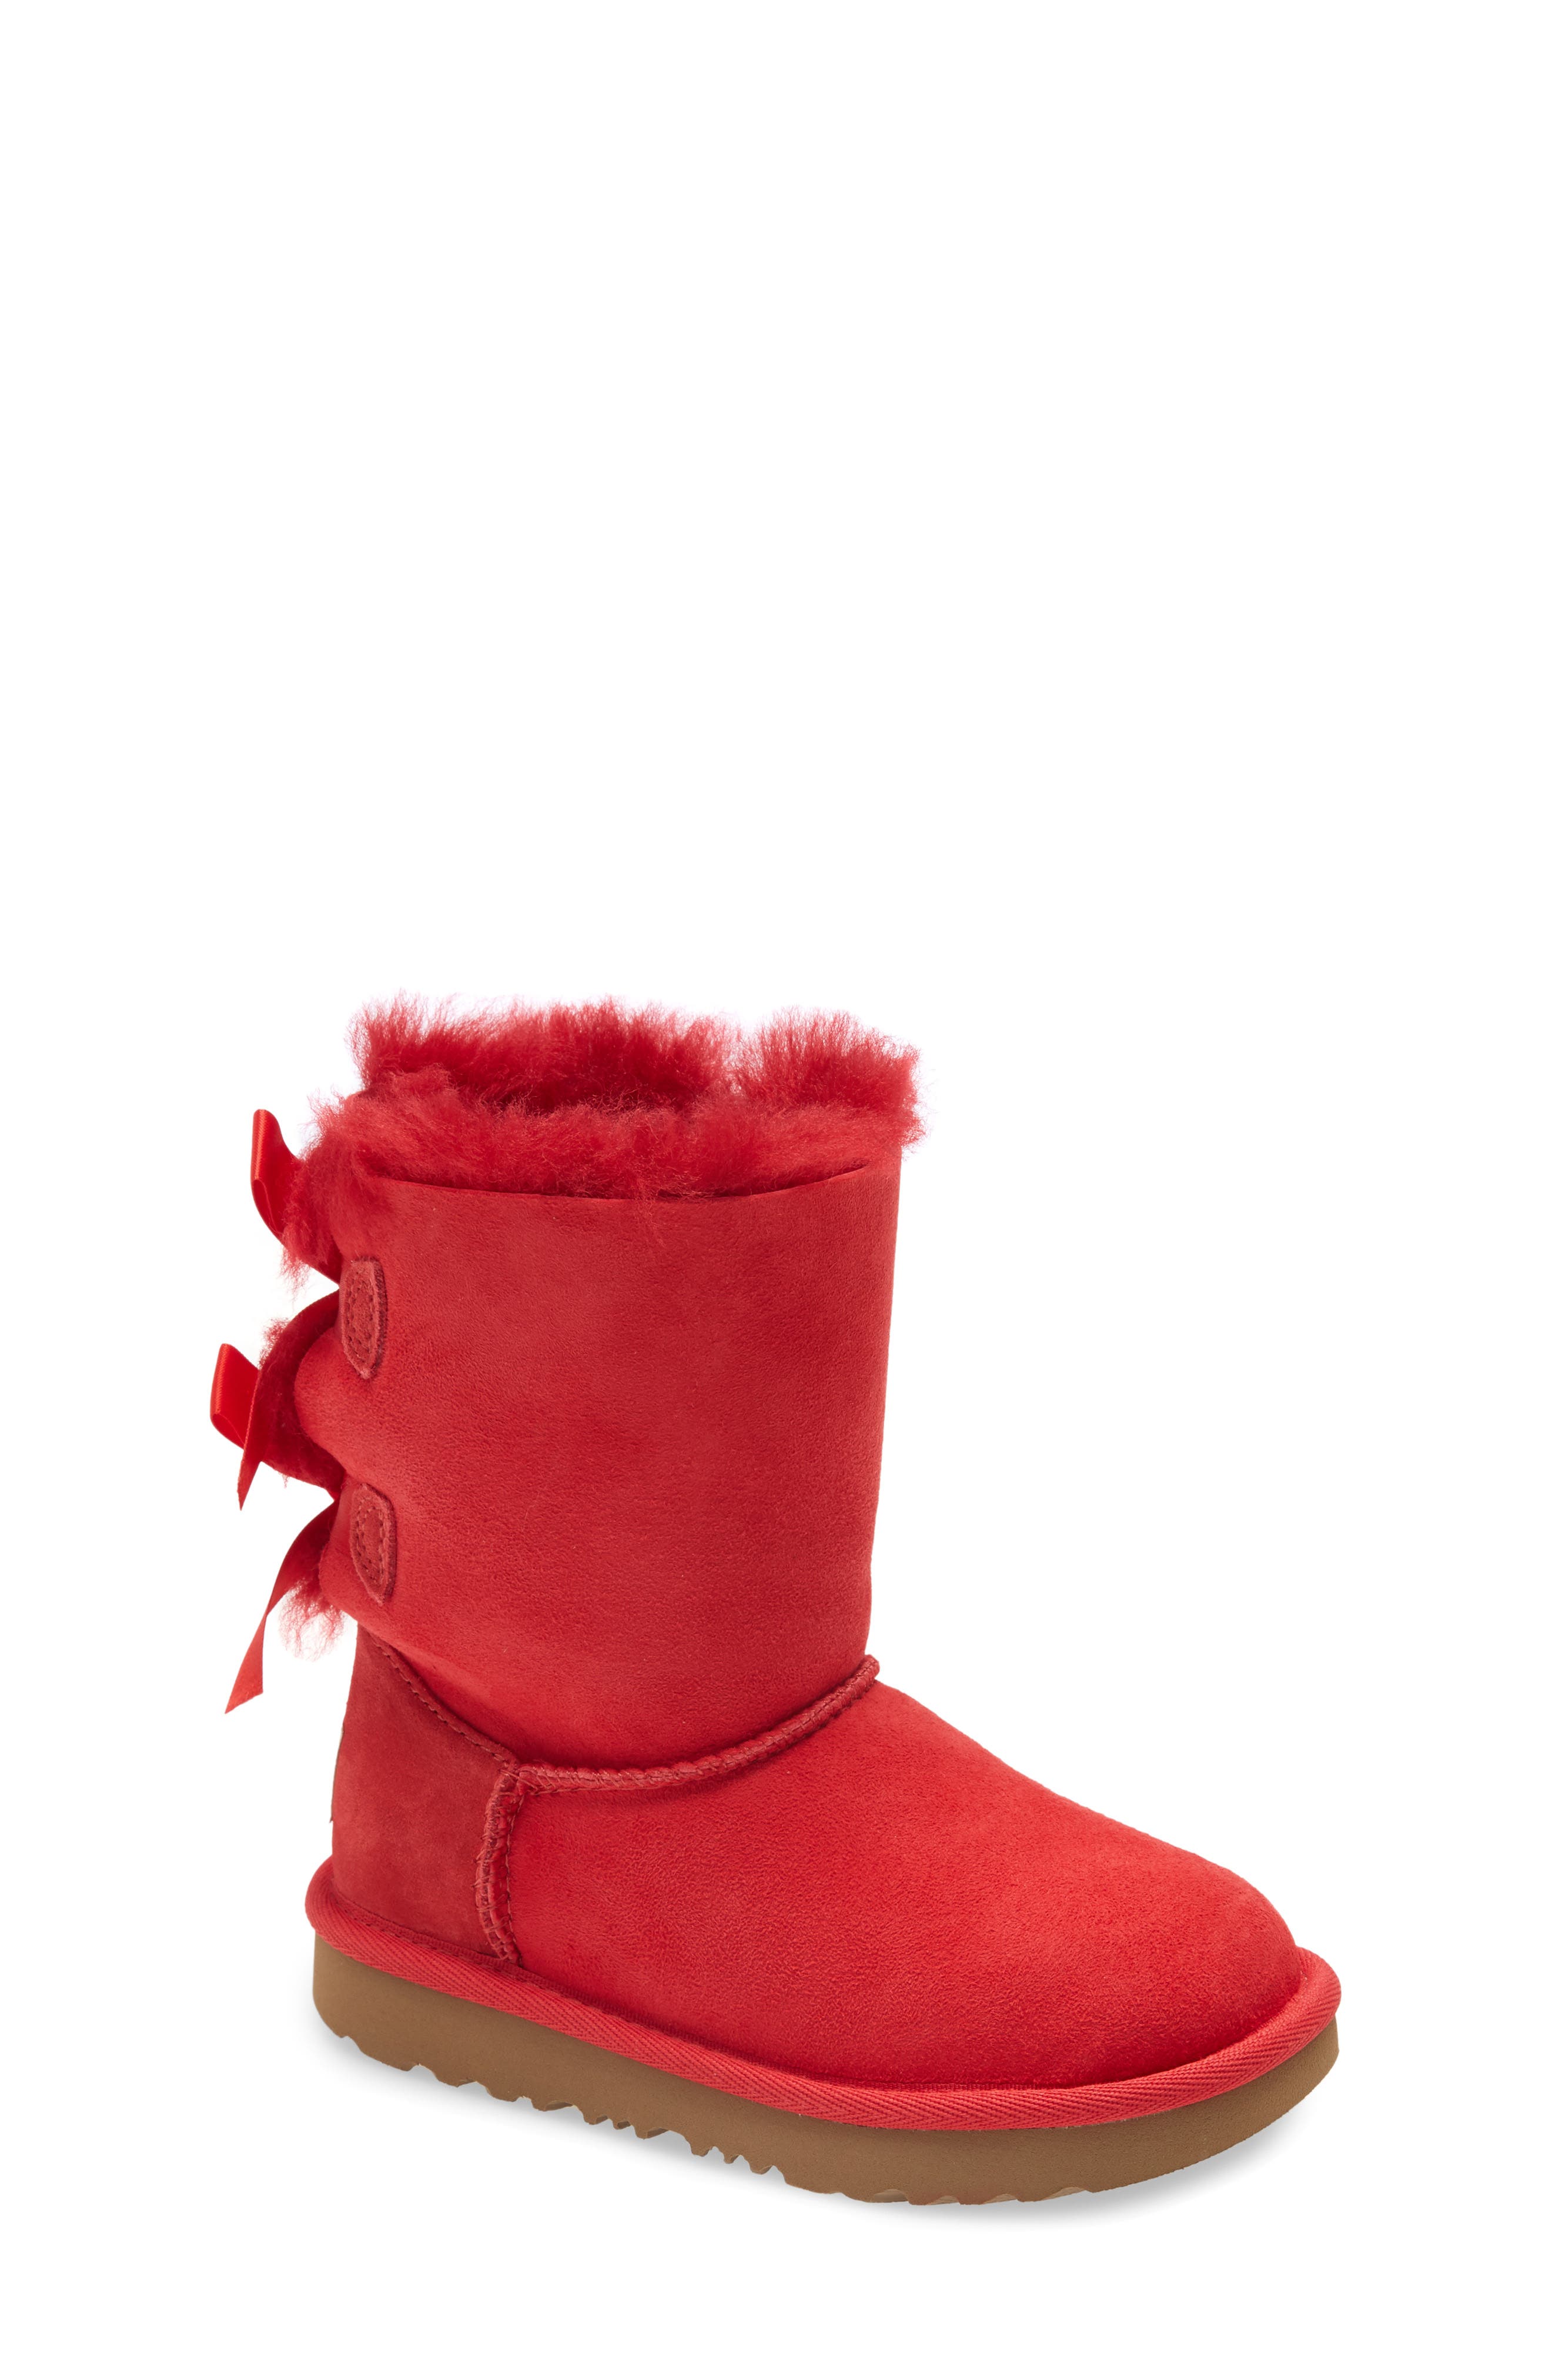 all red boy uggs